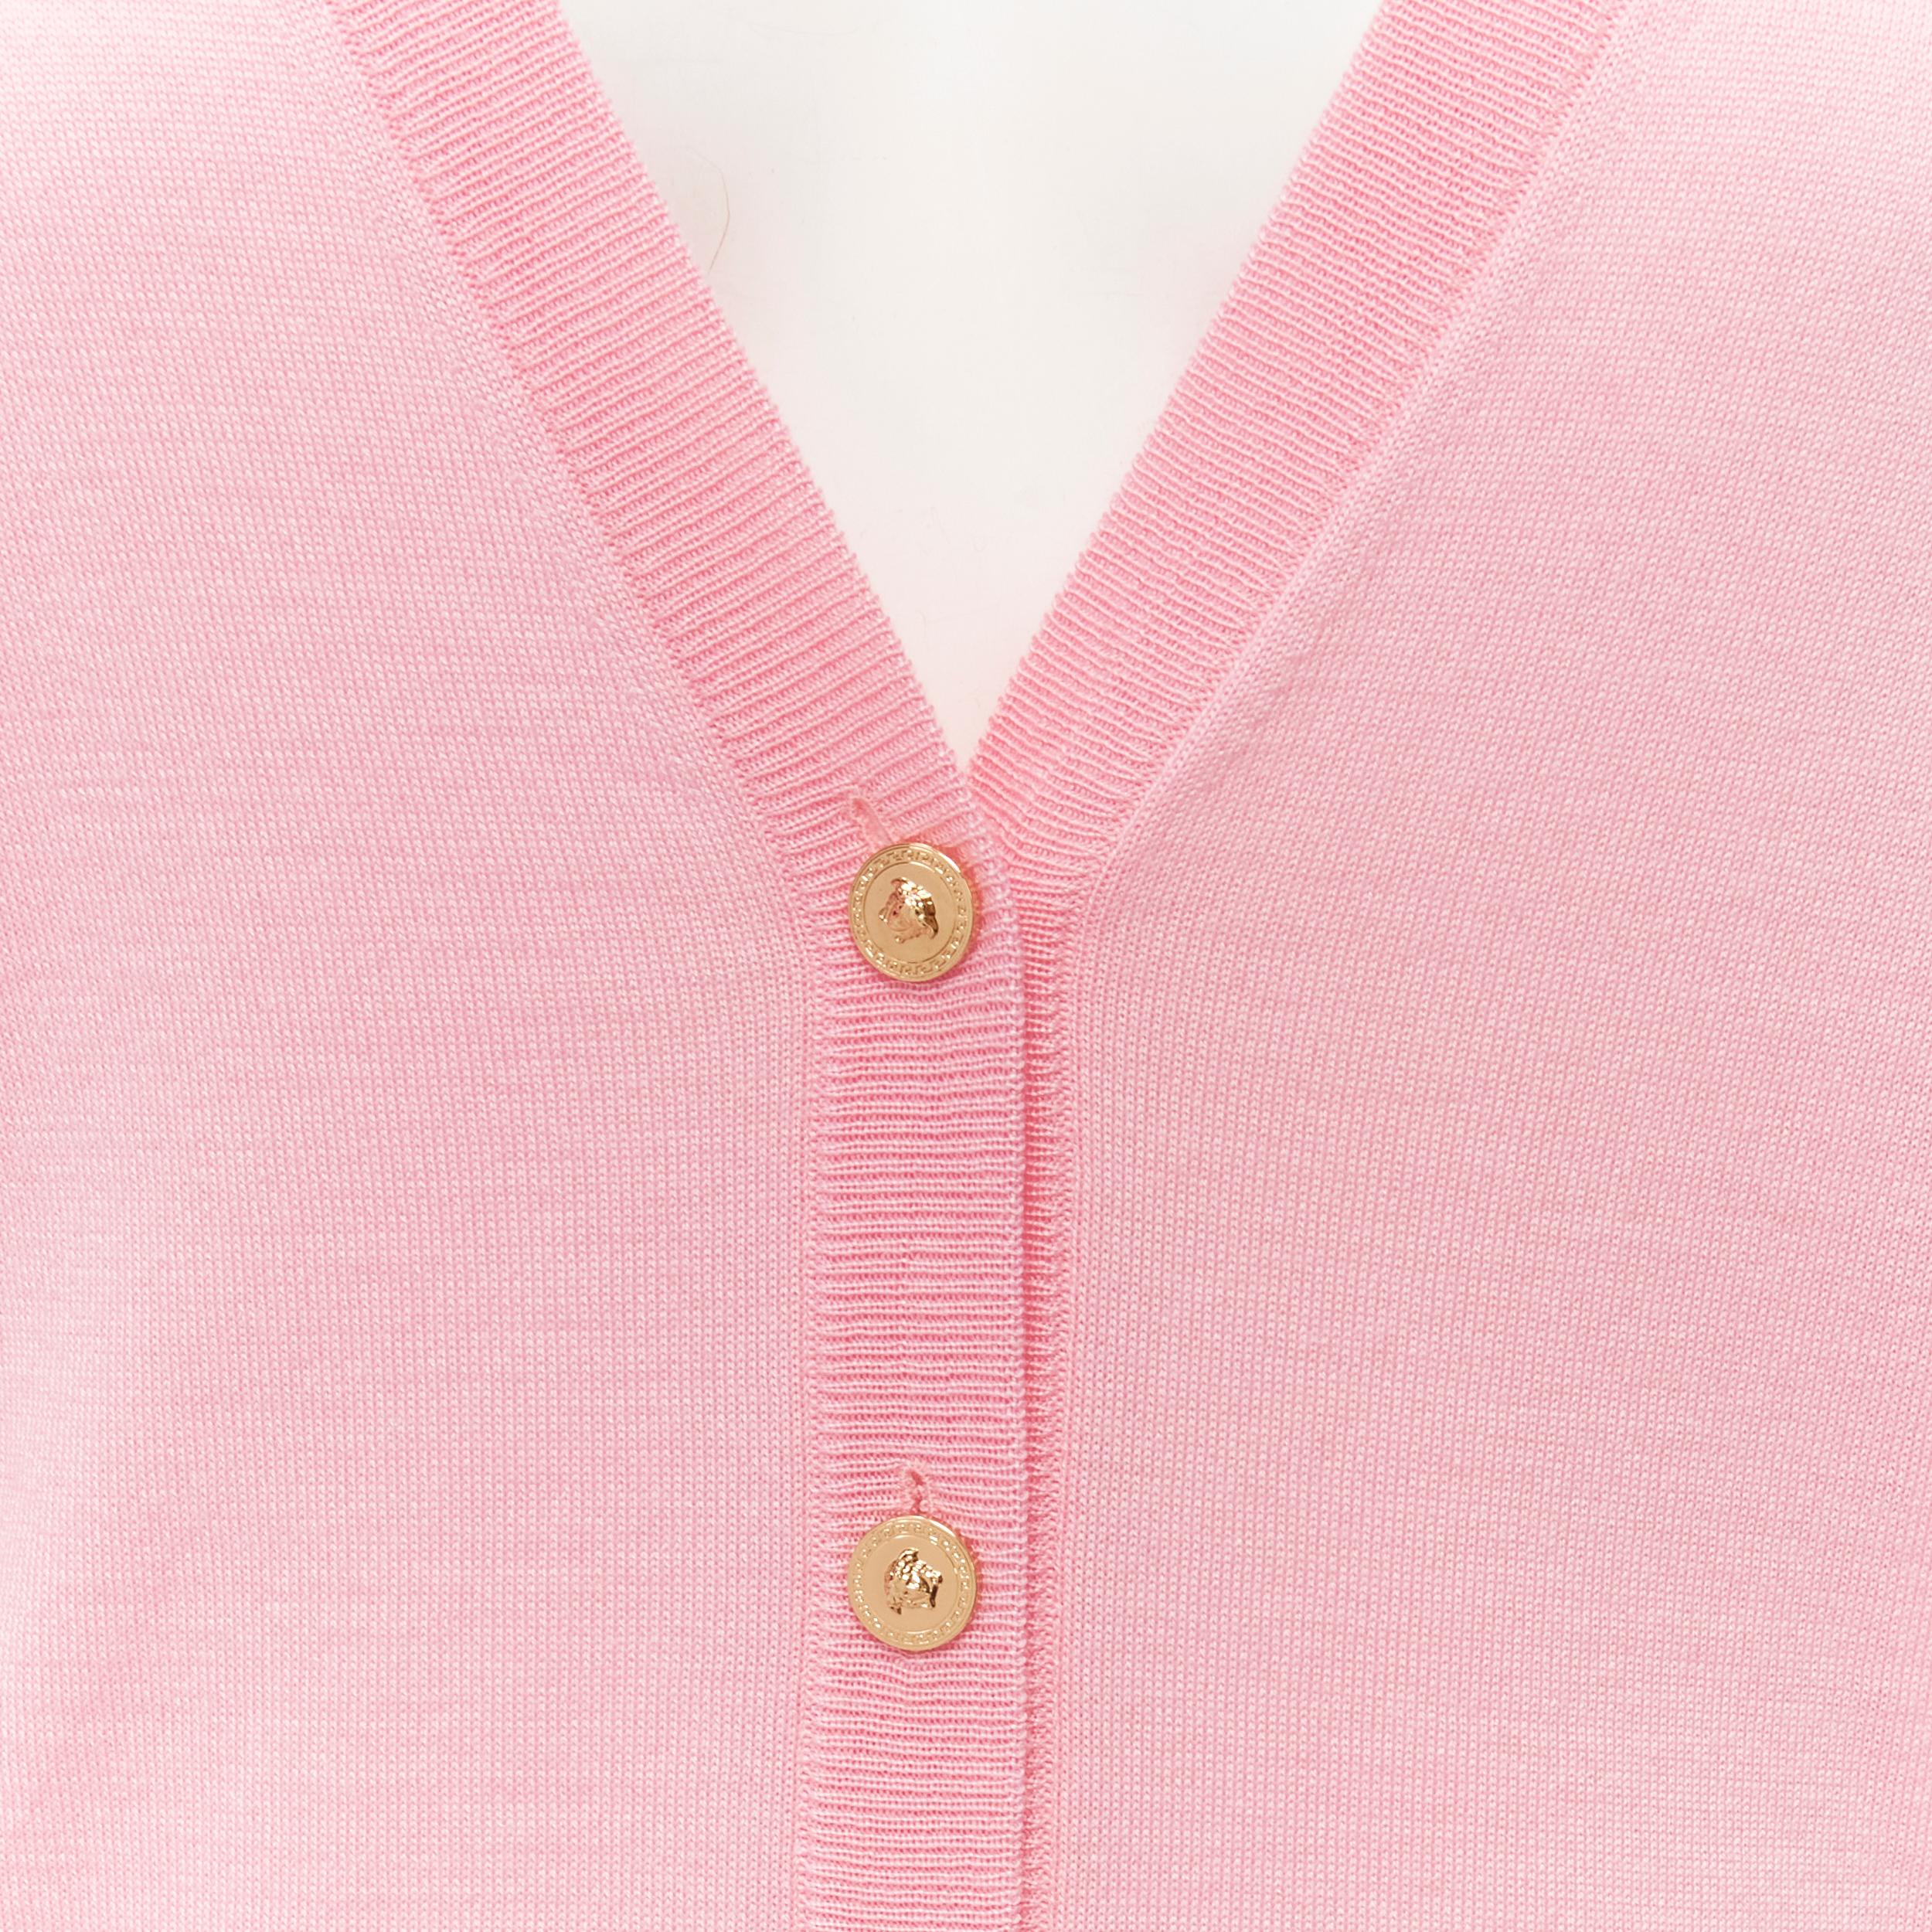 new VERSACE 2020 Medusa buttons pink wool cashmere silk cardigan IT42 M
Reference: TGAS/C01771
Brand: Versace
Designer: Donatella Versace
Model: A89094 A237534 1P590
Collection: 2020
Material: Virgin Wool, Cashmere
Color: Pink
Pattern: